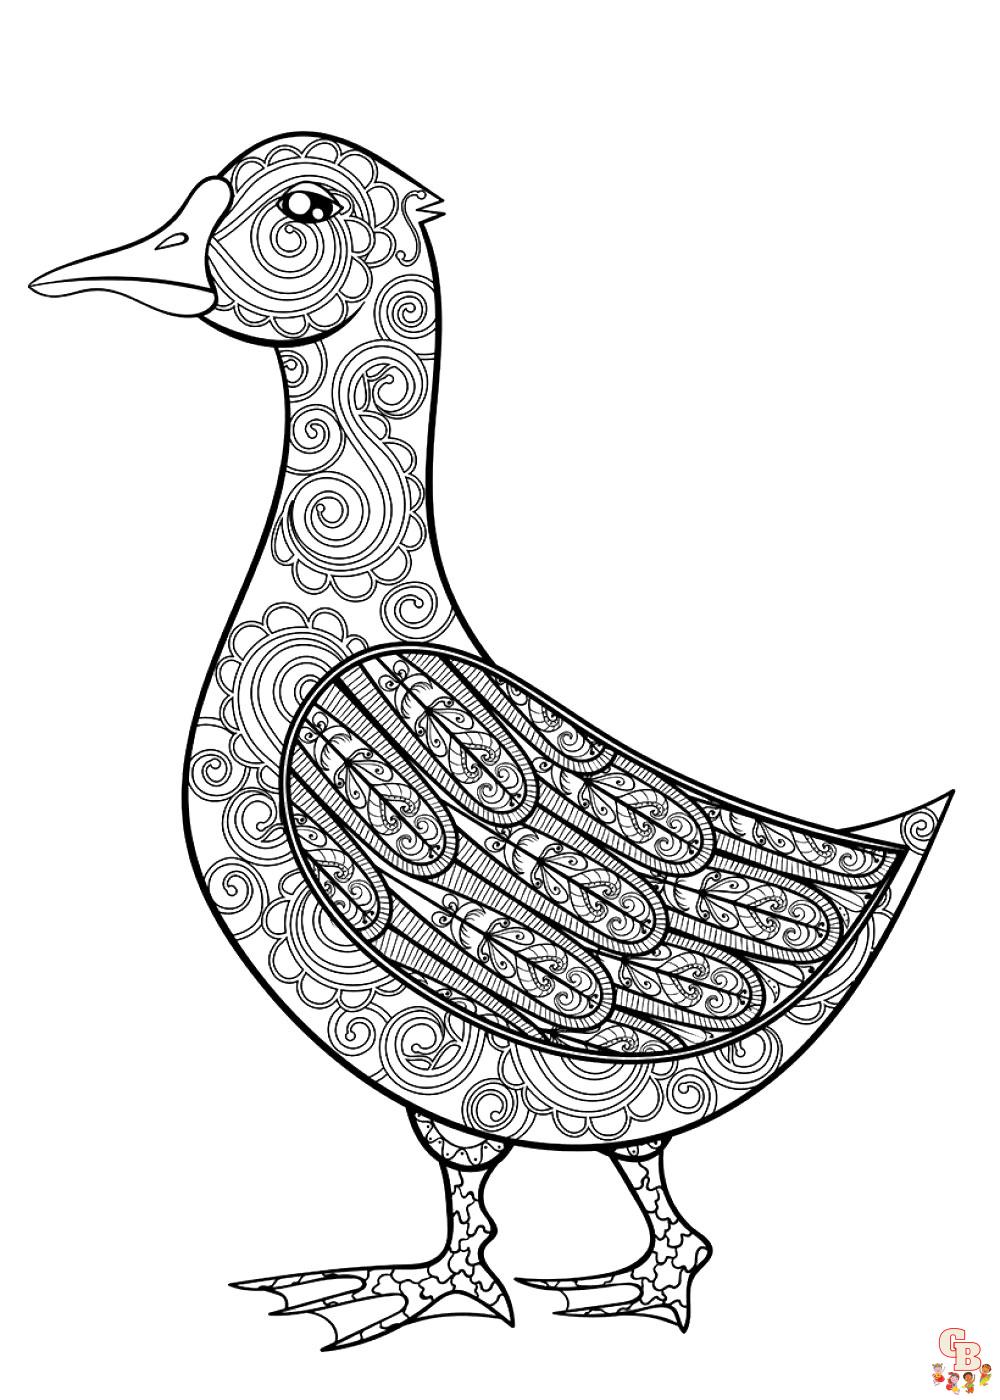 Duck coloring pages